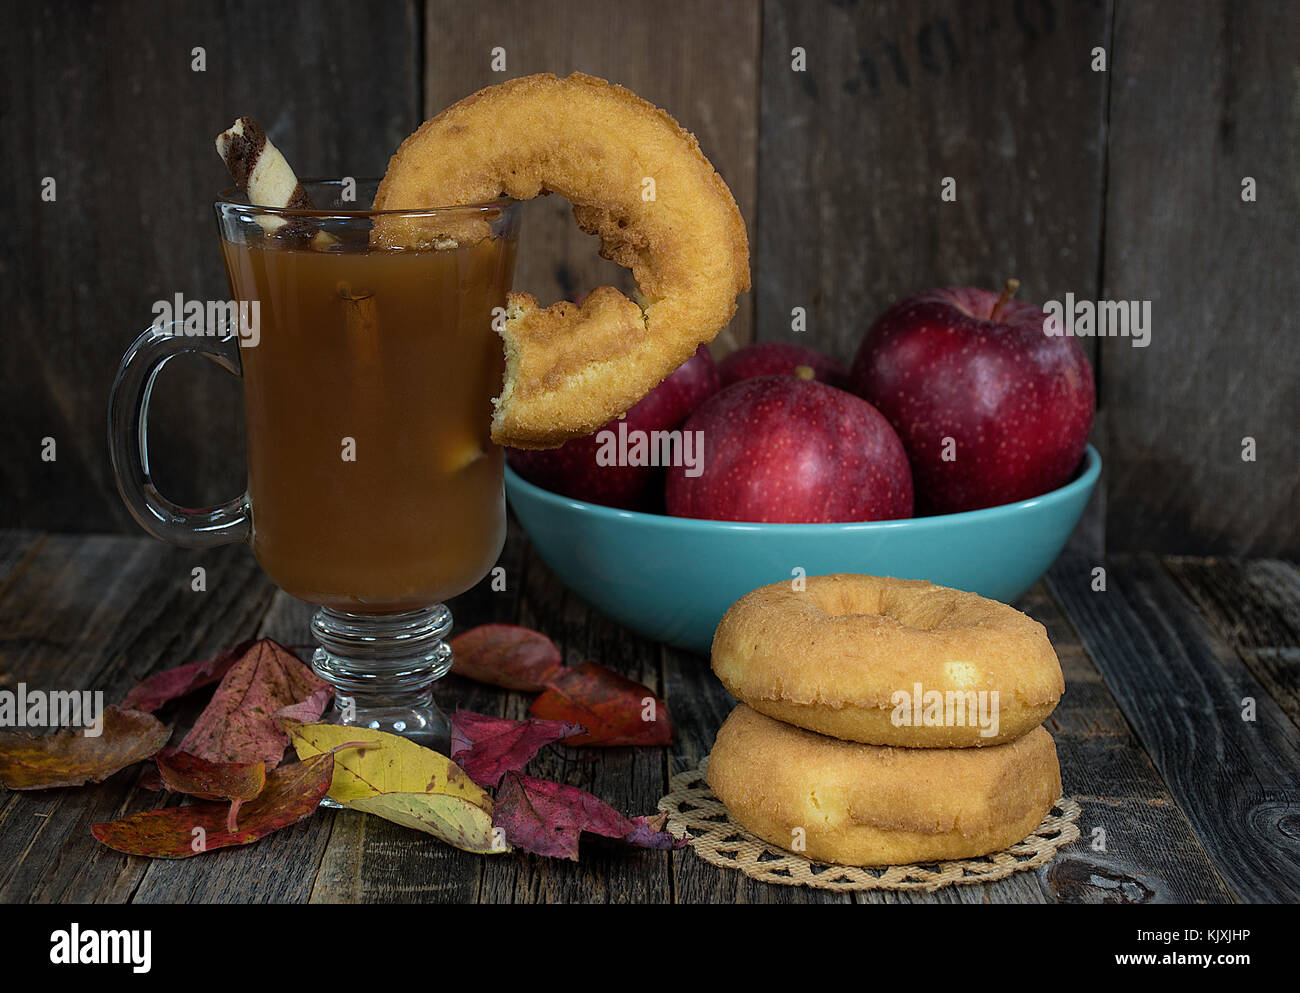 donut on edge of apple cider in glass mug with fall leaves and red apples in turquoise bowl on rustic wood Stock Photo